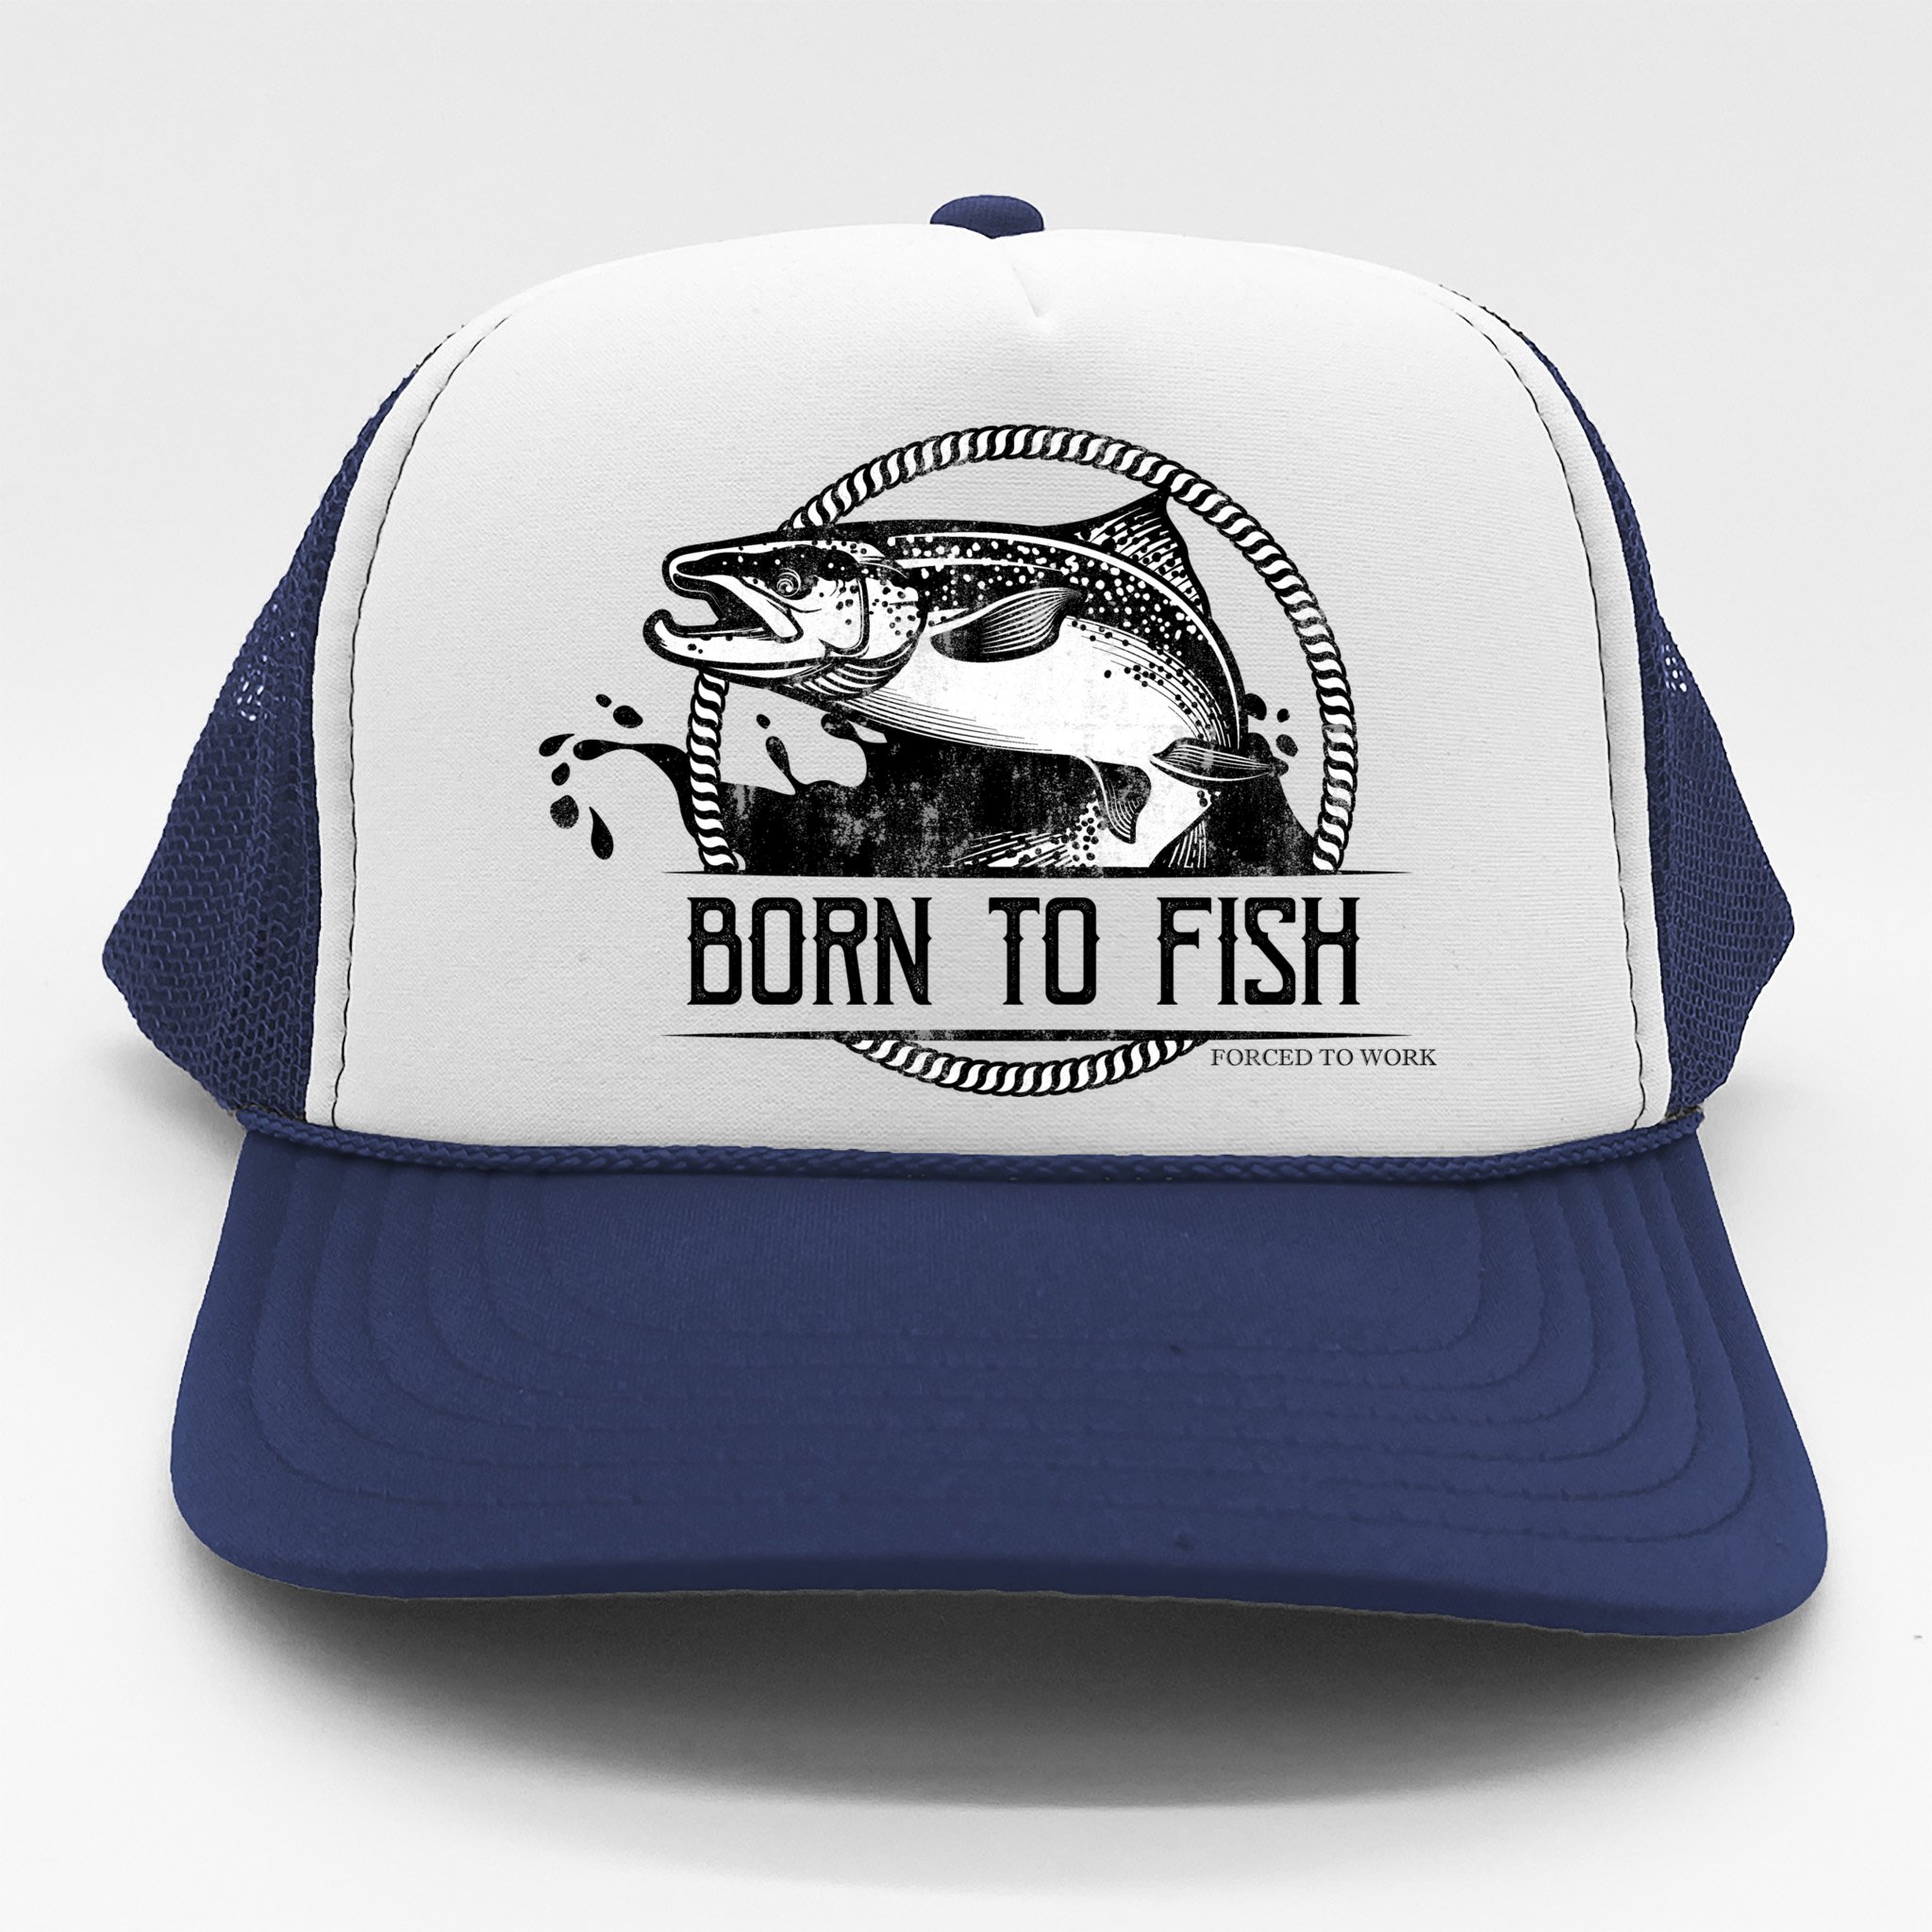 https://images3.teeshirtpalace.com/images/productImages/born-to-fish-forced-to-work--navy-th-garment.jpg